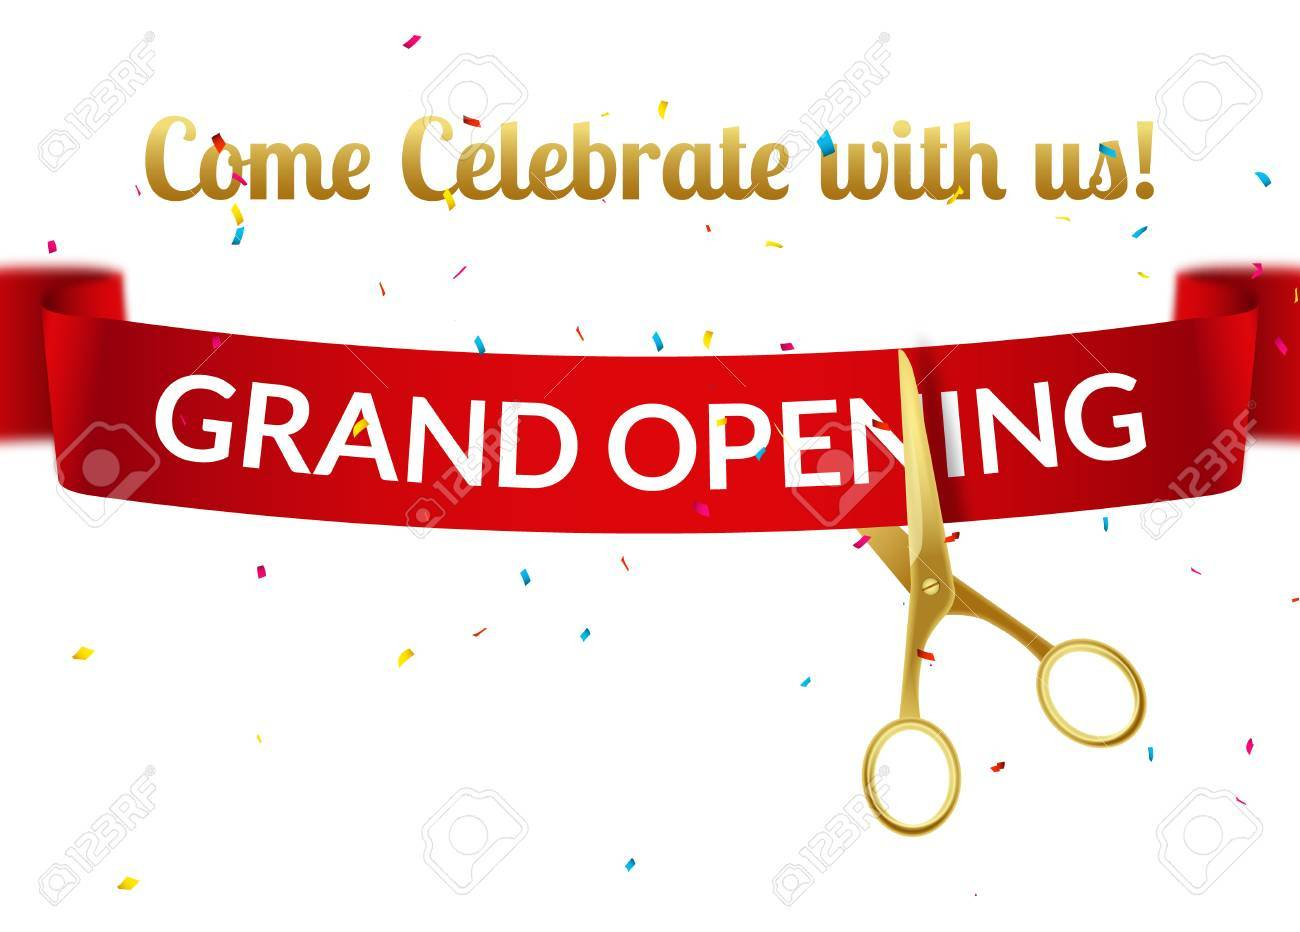 Grand Opening Design Template With Ribbon And Scissors Grand inside dimensions 1300 X 932